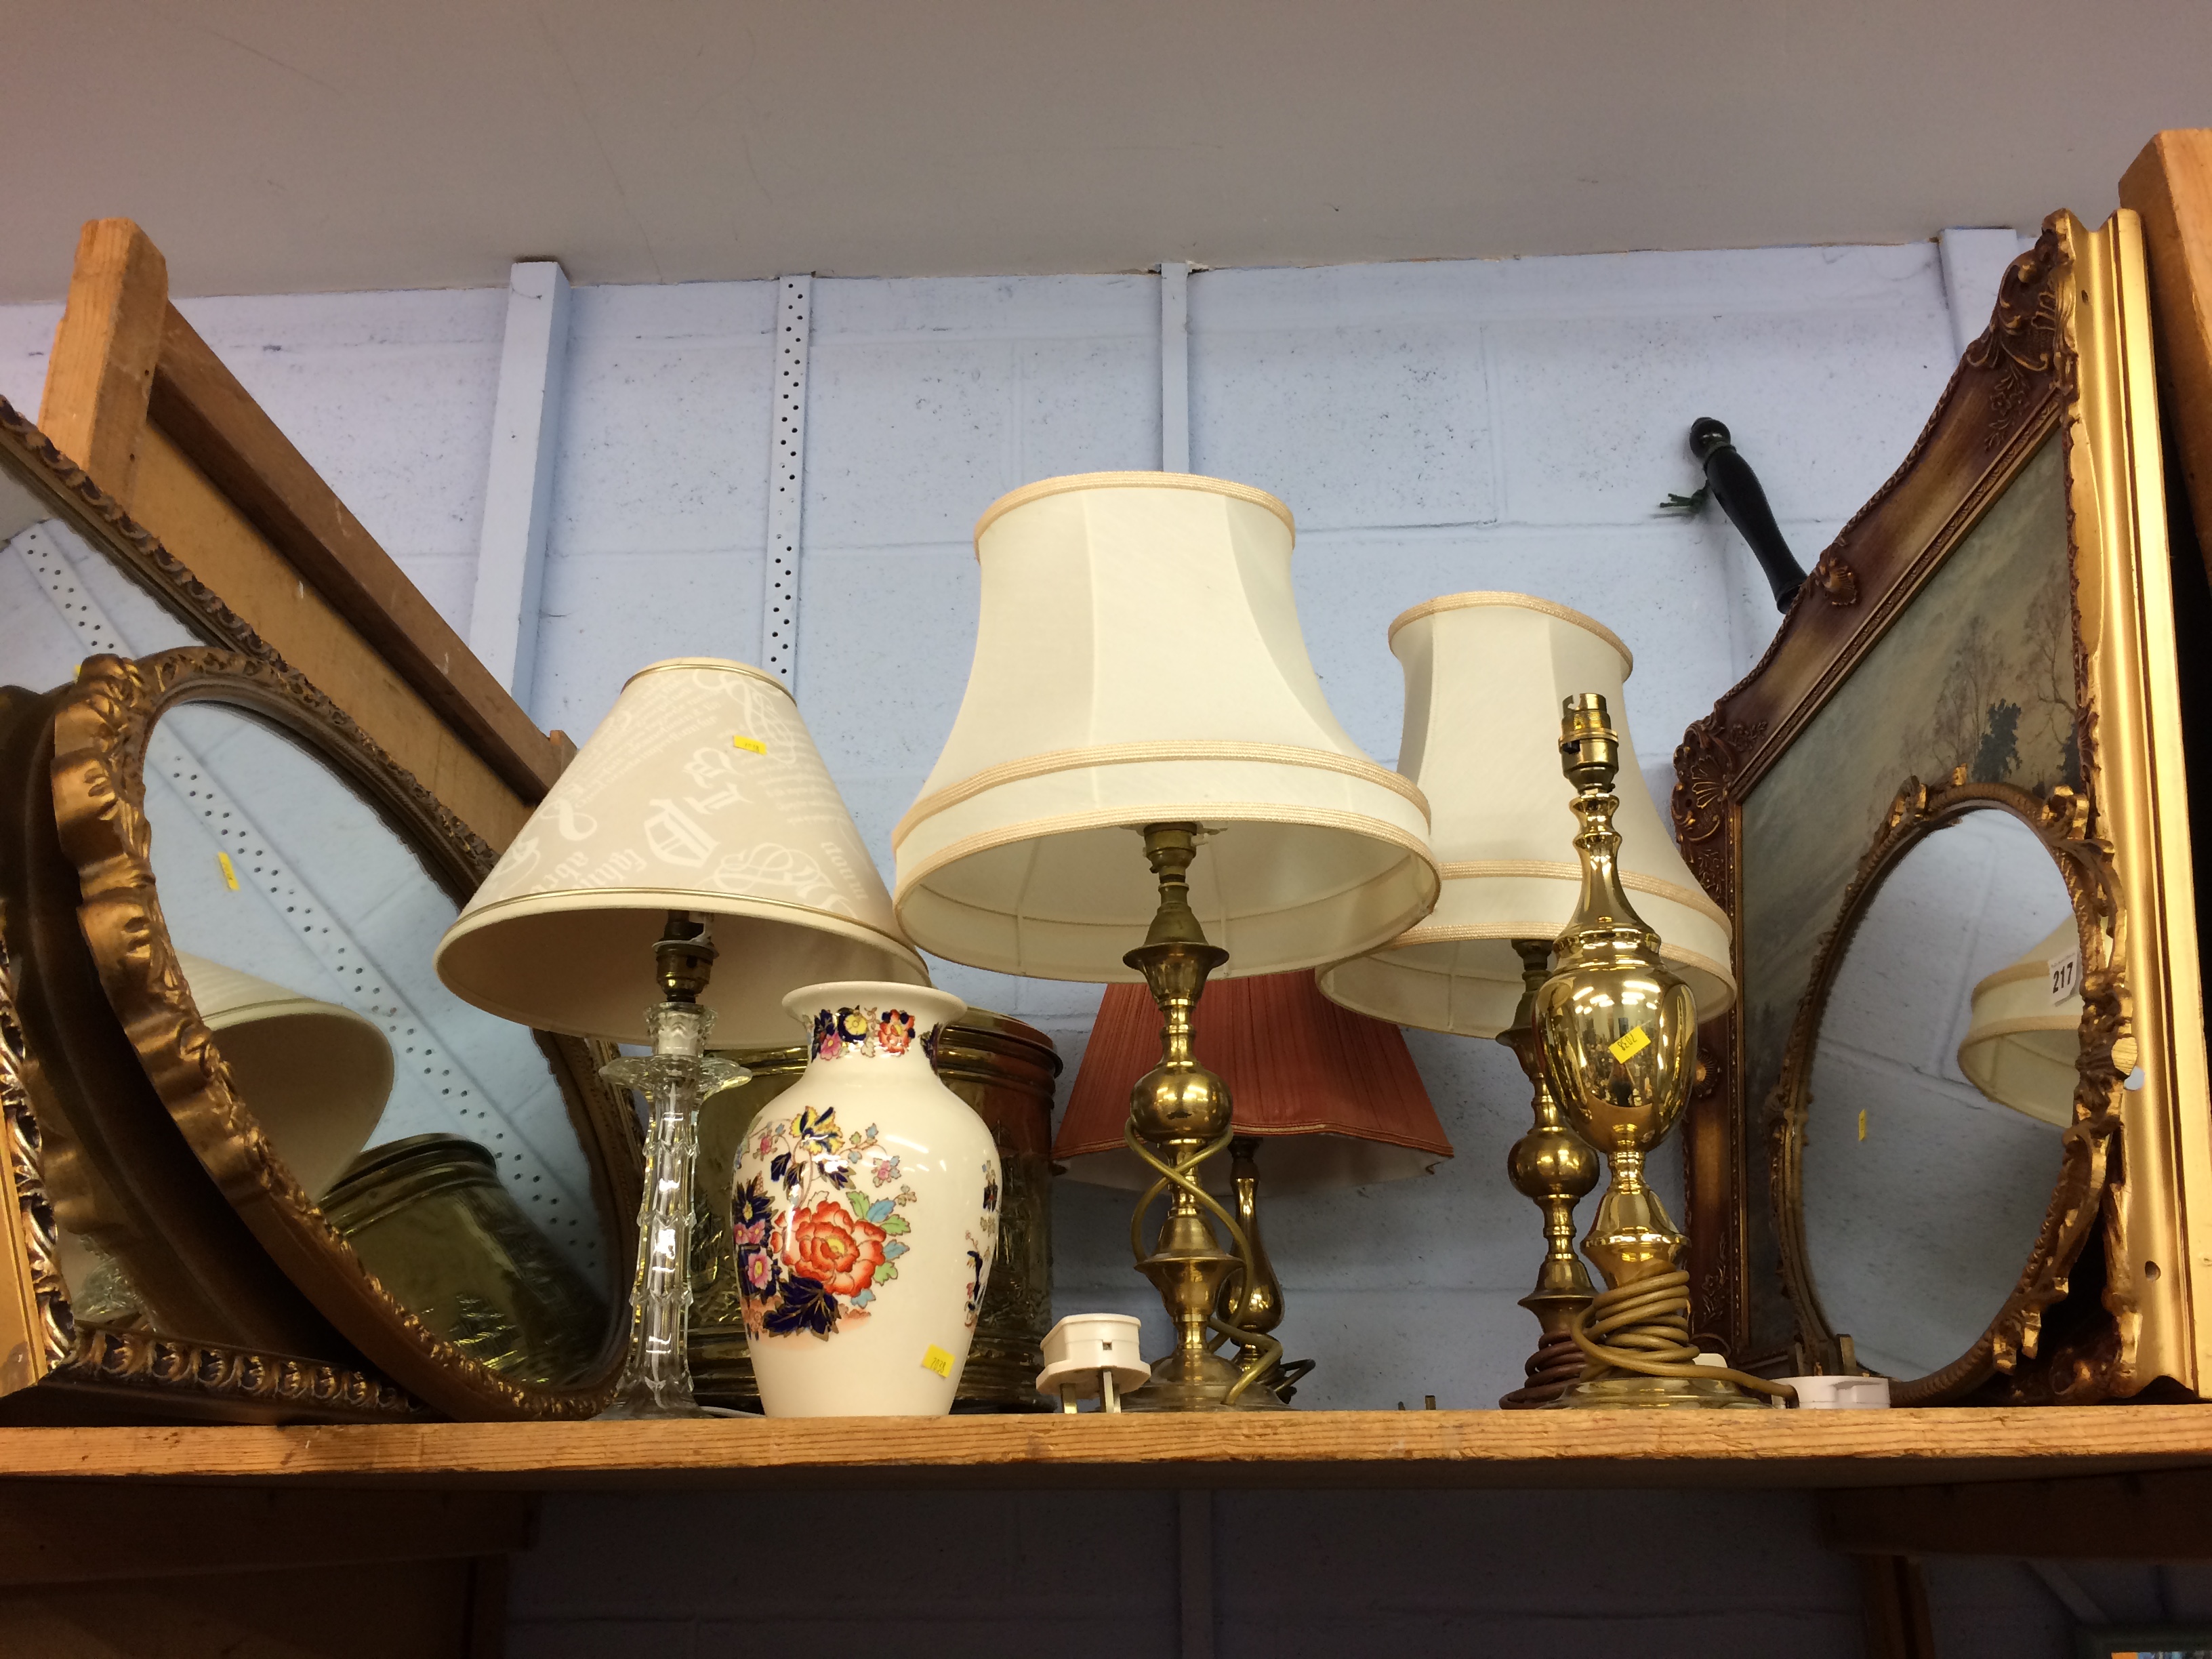 Table lamps, mirrors etc.